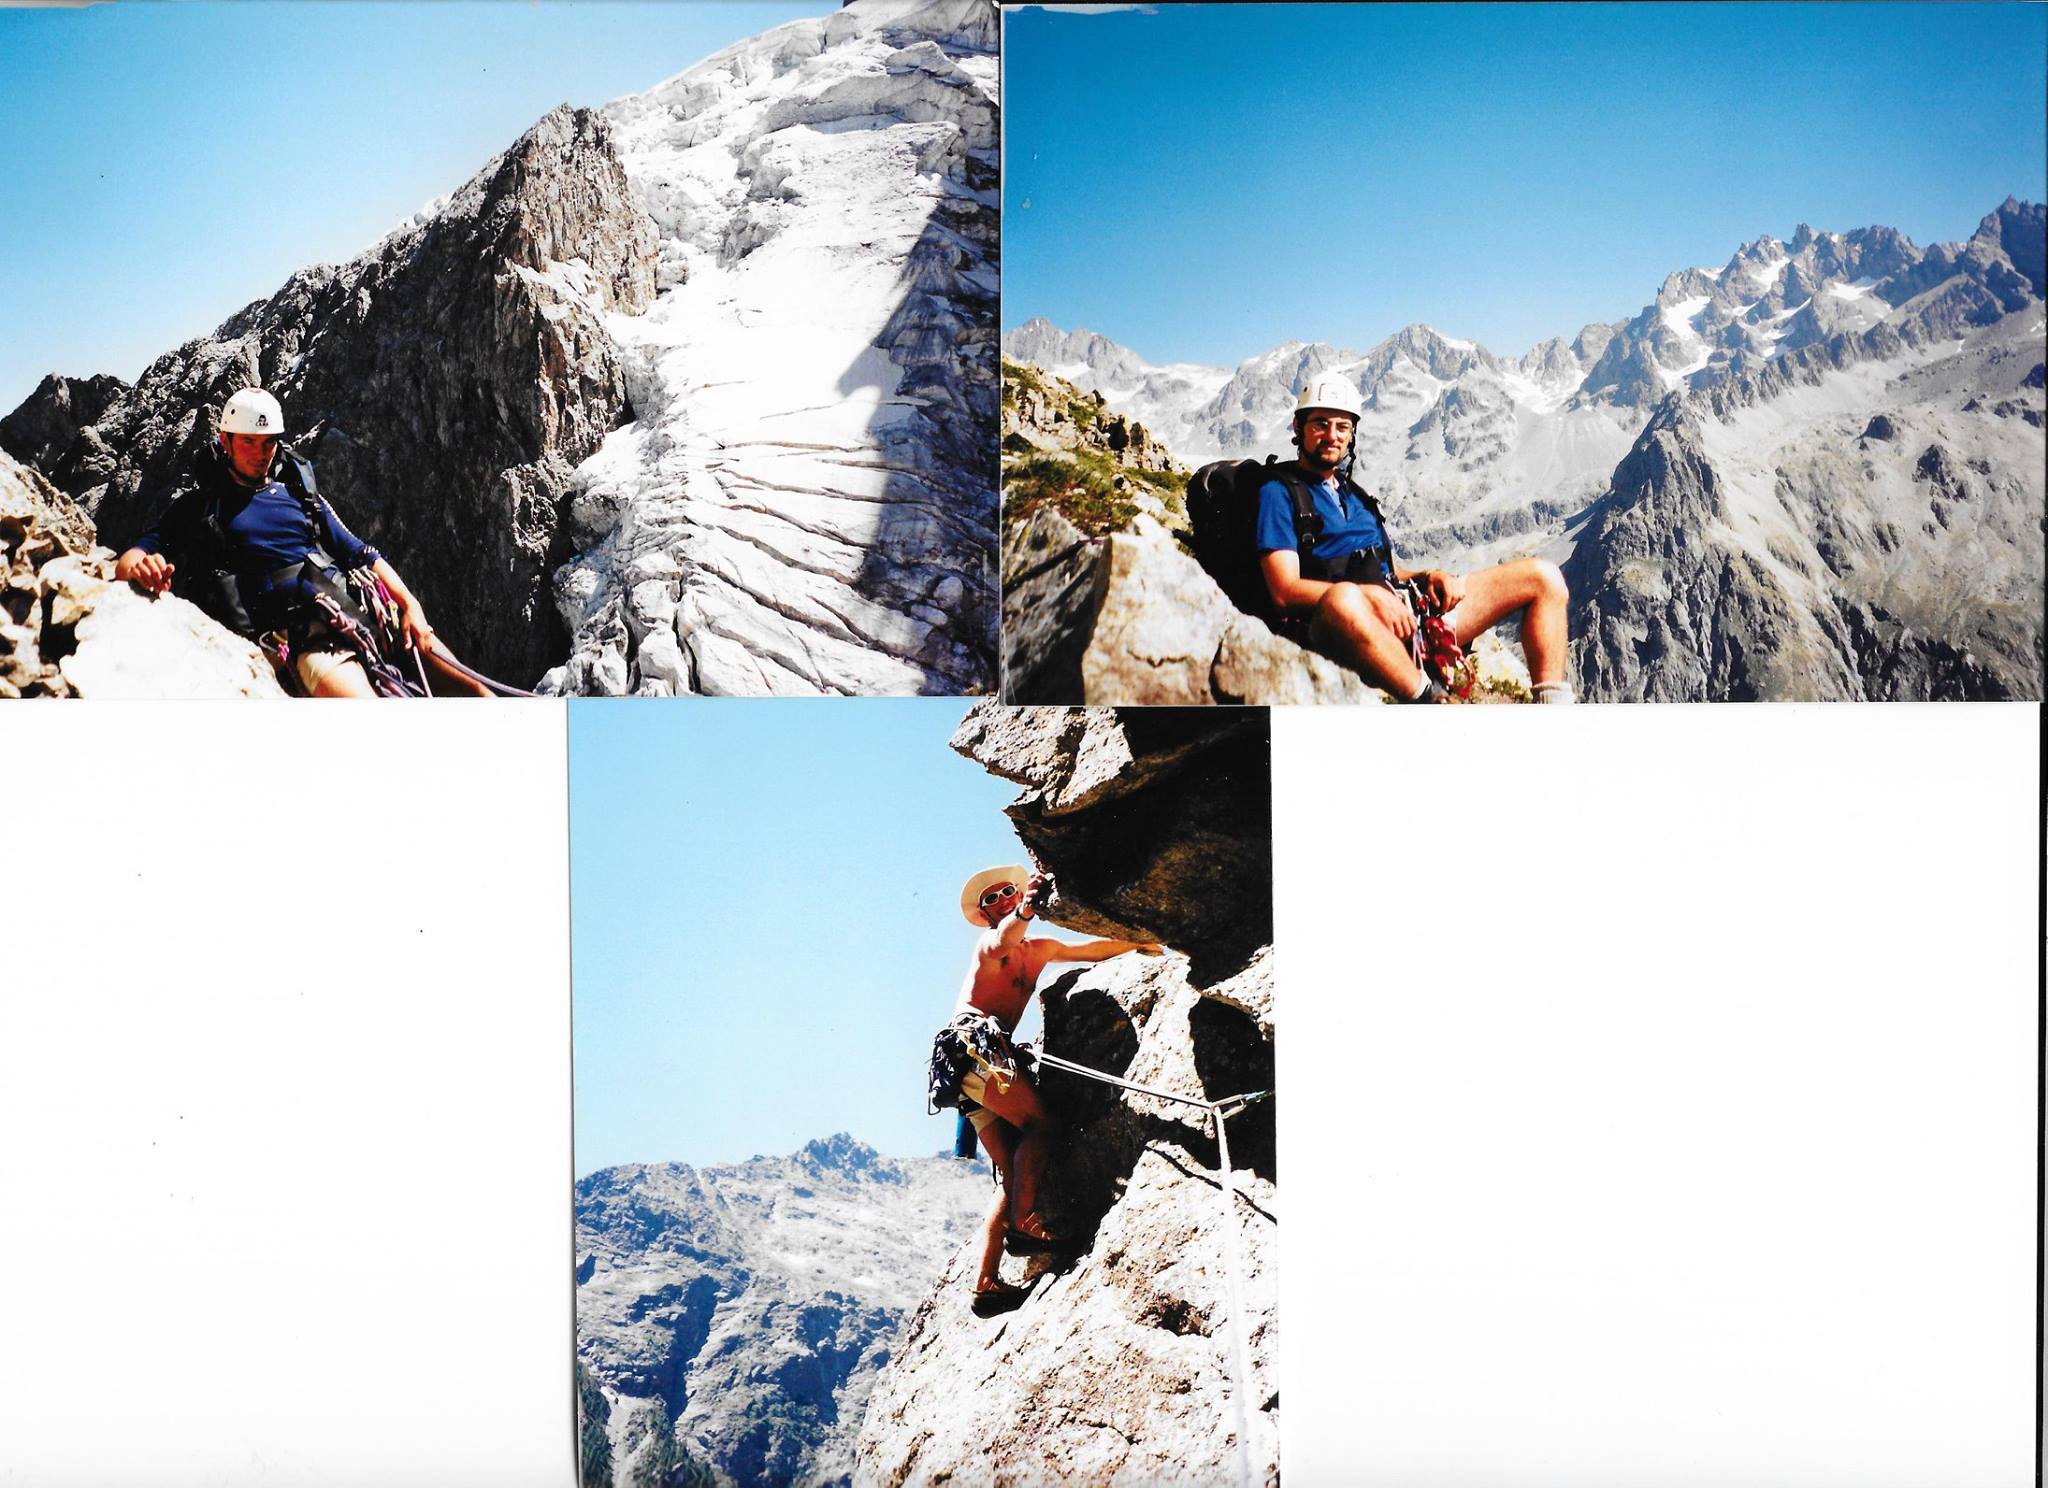 Happy days in my early 20's climbing in Ailefroide with Rich Baker. the two at the top are from one of the spiciest escapades which failed hopelessly, an attempt on the Violettes ridge of the Pelvoux. Vastly over ambitious, somewhat arrogant, we ended up spending a night sleeping in our down jackets with our feet in our rucksacks before making an escape back to the valley.